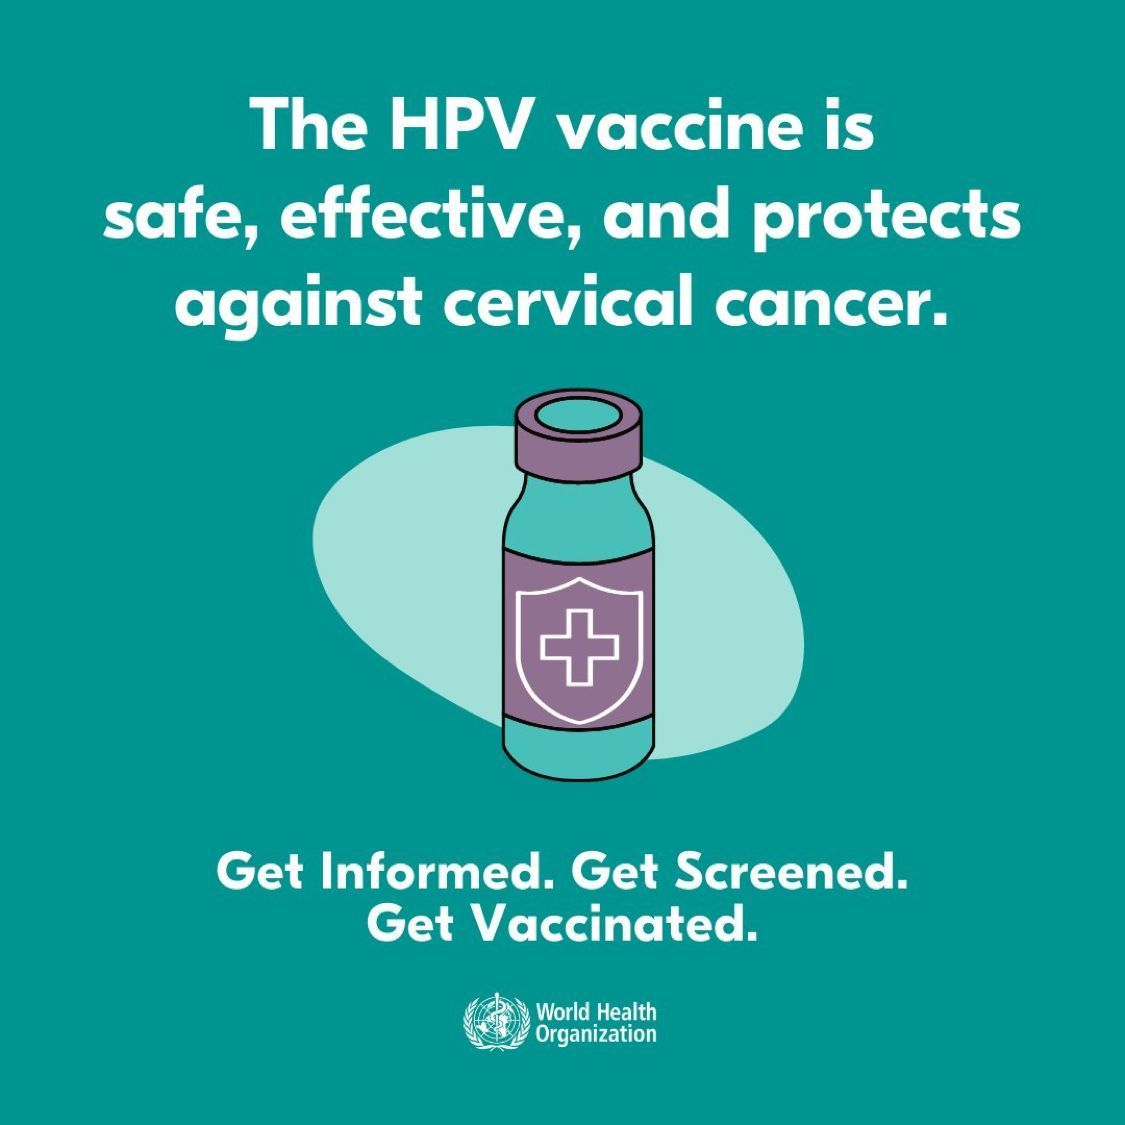 The HPV #vaccine is safe, effective and protects against cervical cancer.

#GetInformed
#GetScreened
#GetVaccinated